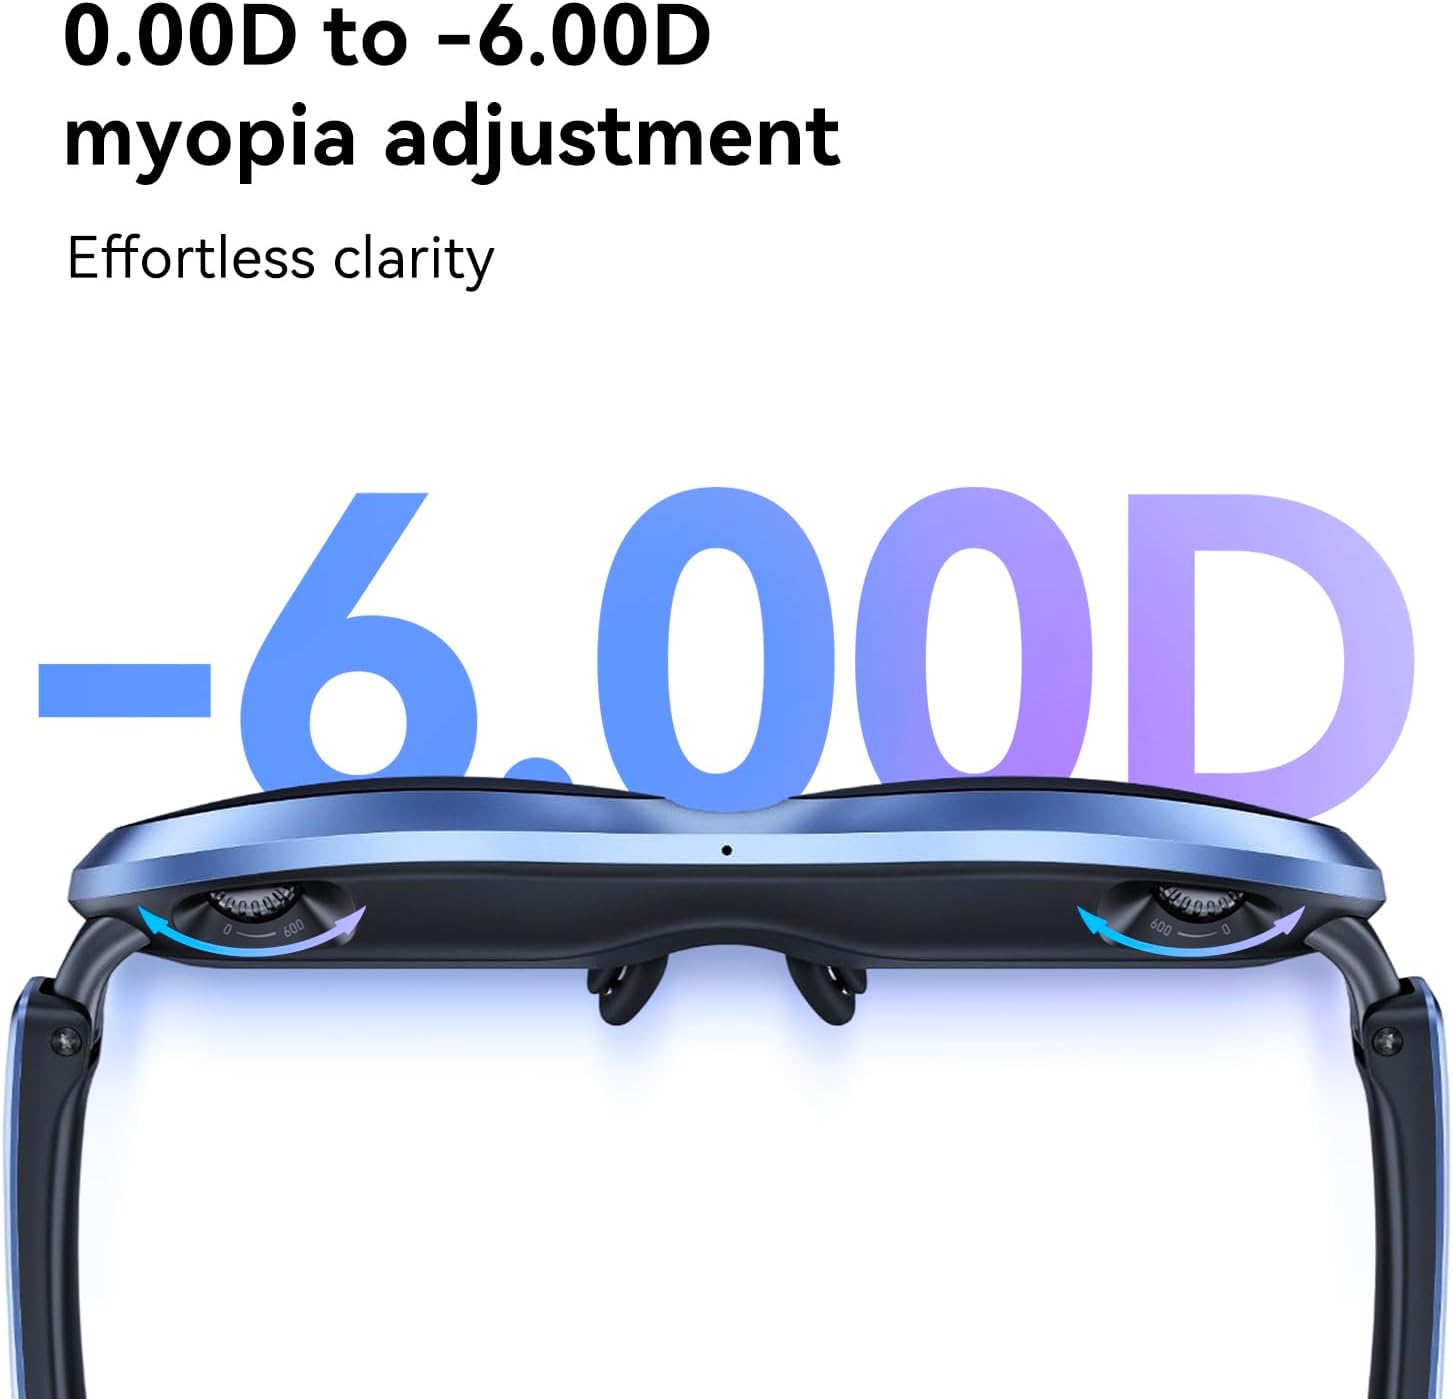 Rokid Max AR Glasses, Augmented Reality Glasses Wearable Headsets Smart Glasses for Video Display, Myopia Friendly Portable Massive 1080P Screen, Game, Watch on Android/iOS/PC/Tablets/Game Consoles